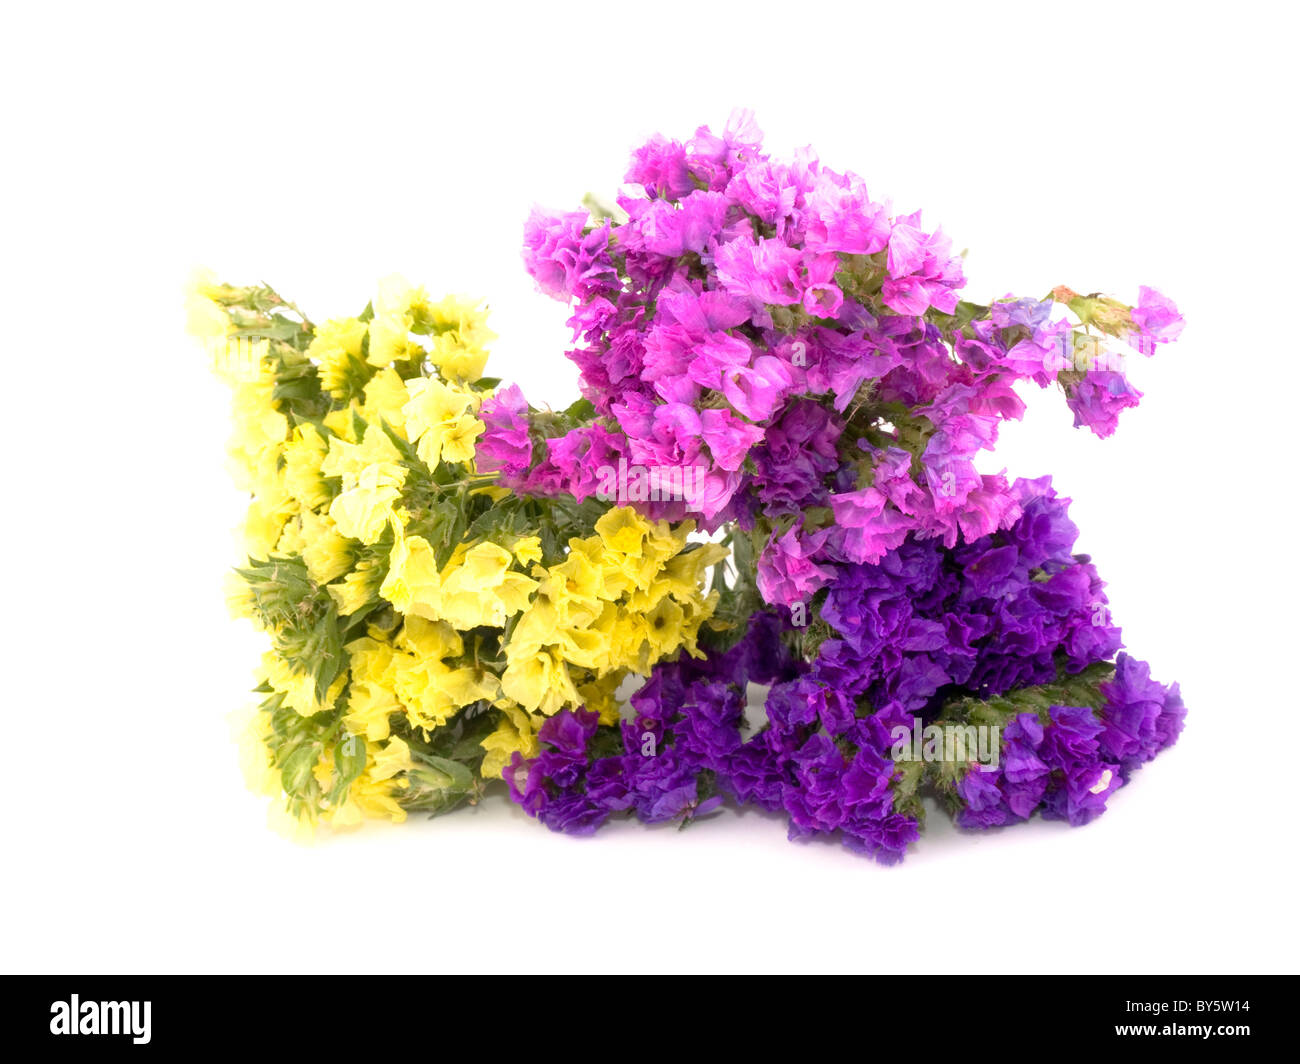 Bouquet of beautiful statice flowers on white background. Stock Photo